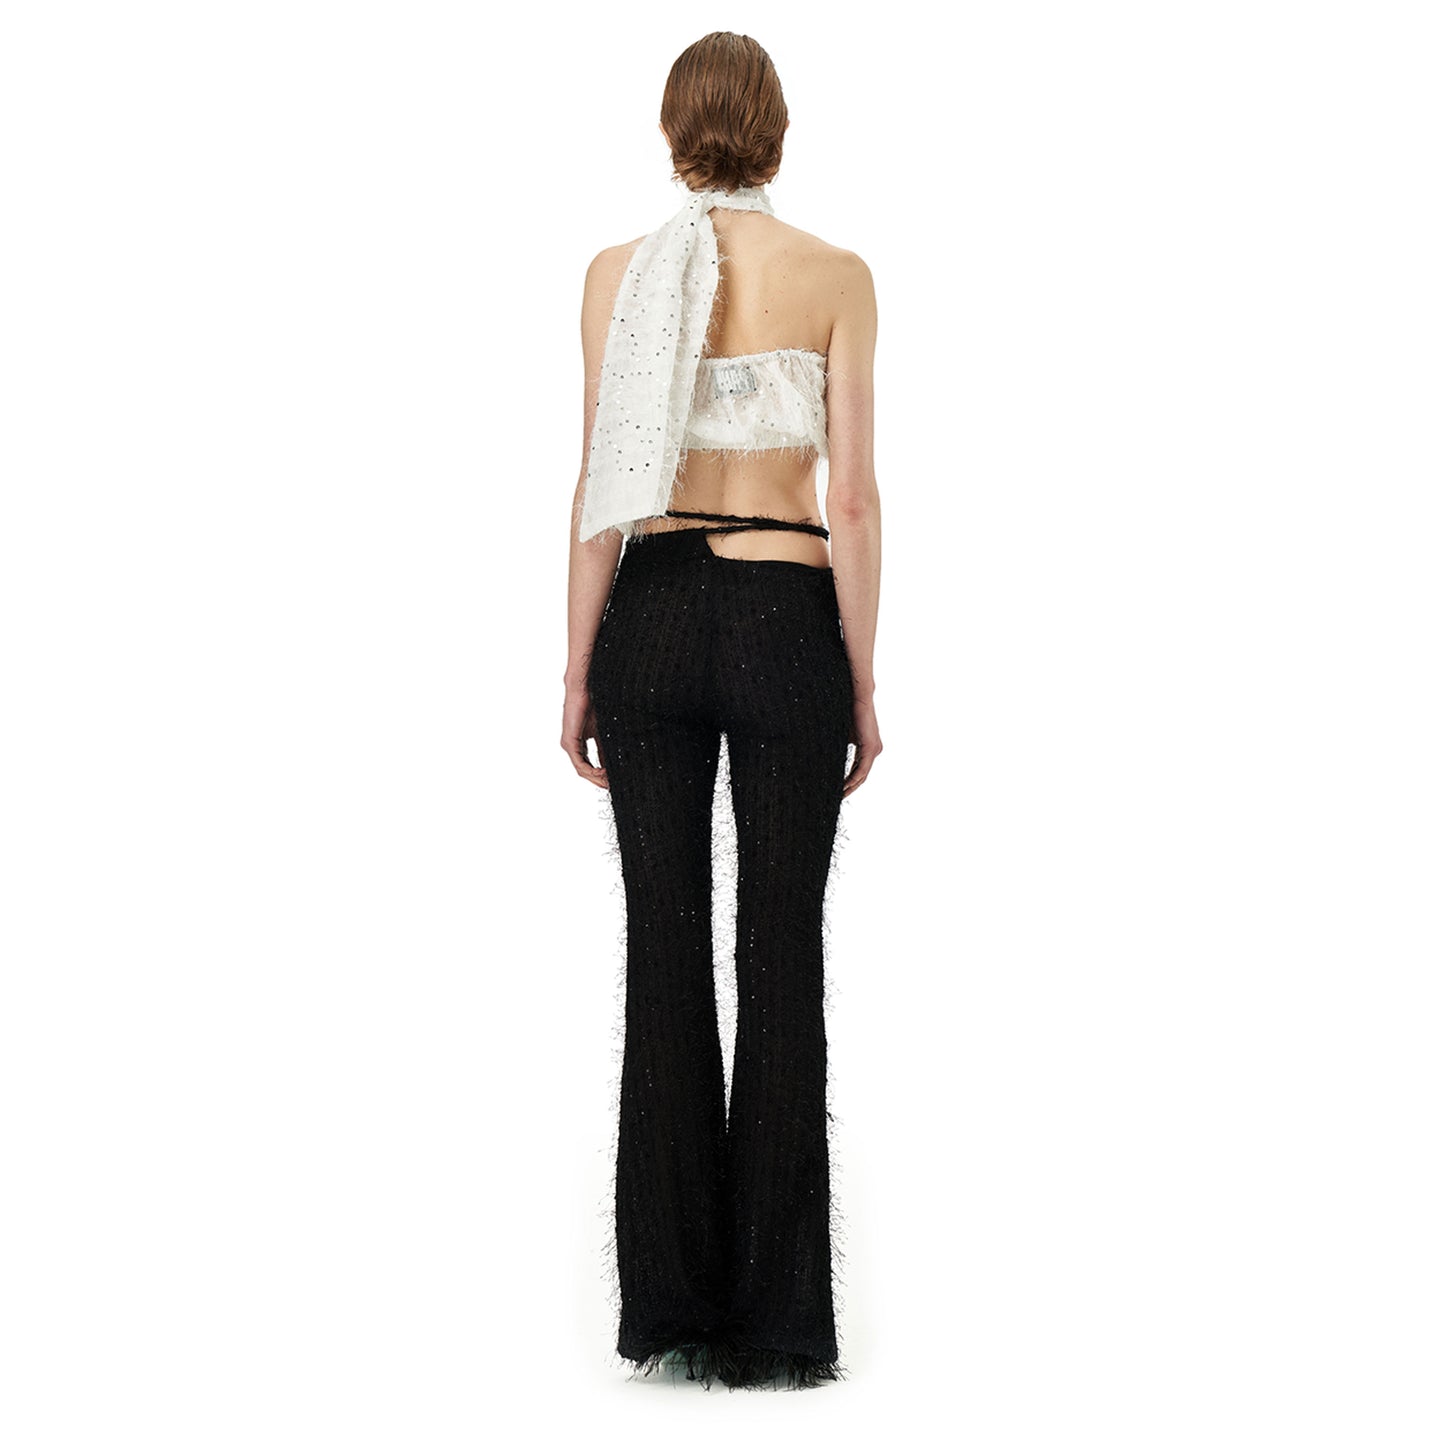 Tadashi Sequined Bow-detailed Top in White